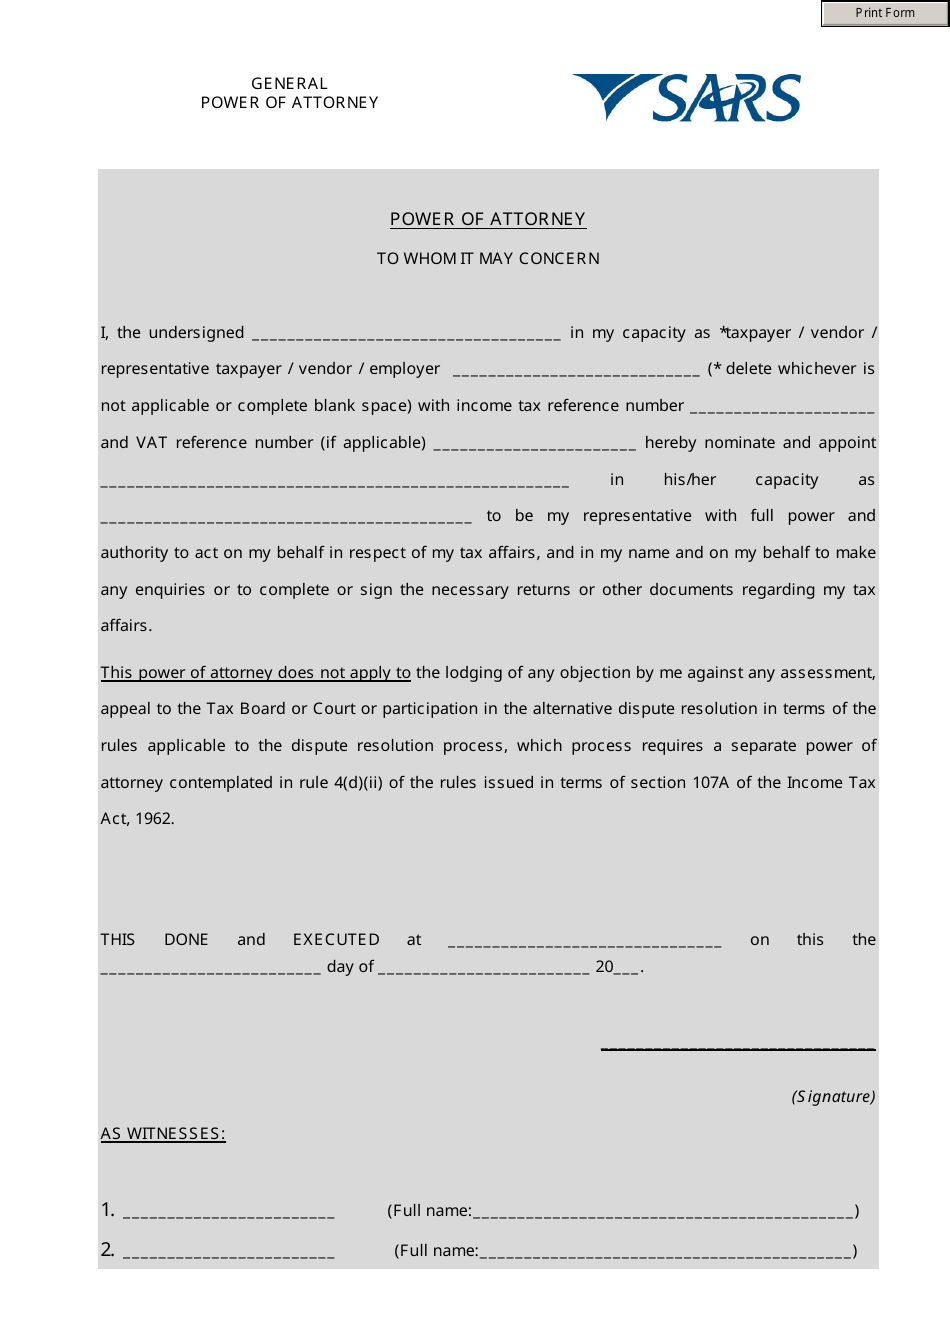 General Power of Attorney Template - Sars, Page 1